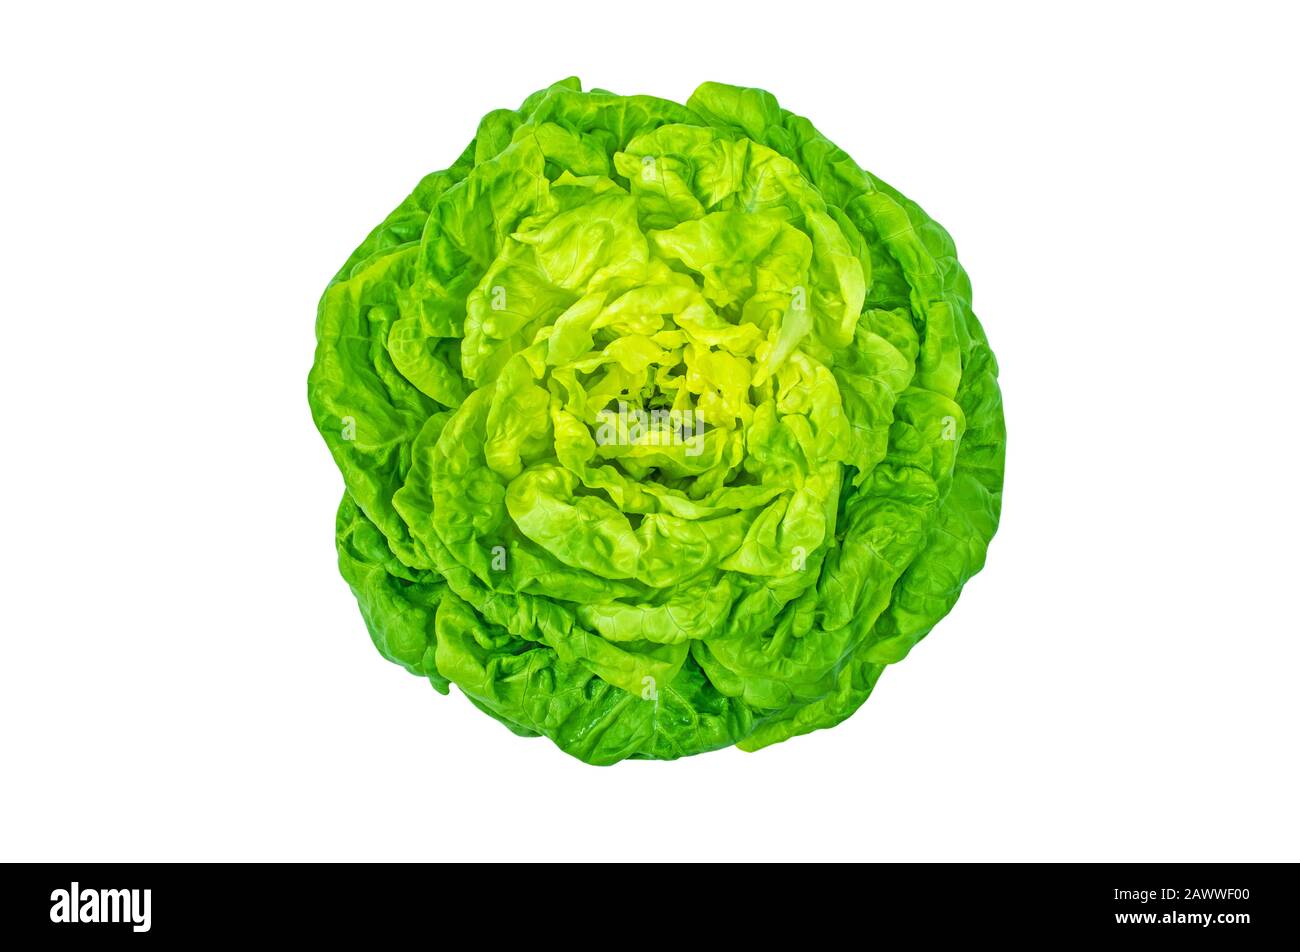 Trocadero lettuce salad heart isolated on white top view. Butterhead variety. Green leafy vegetable. Stock Photo